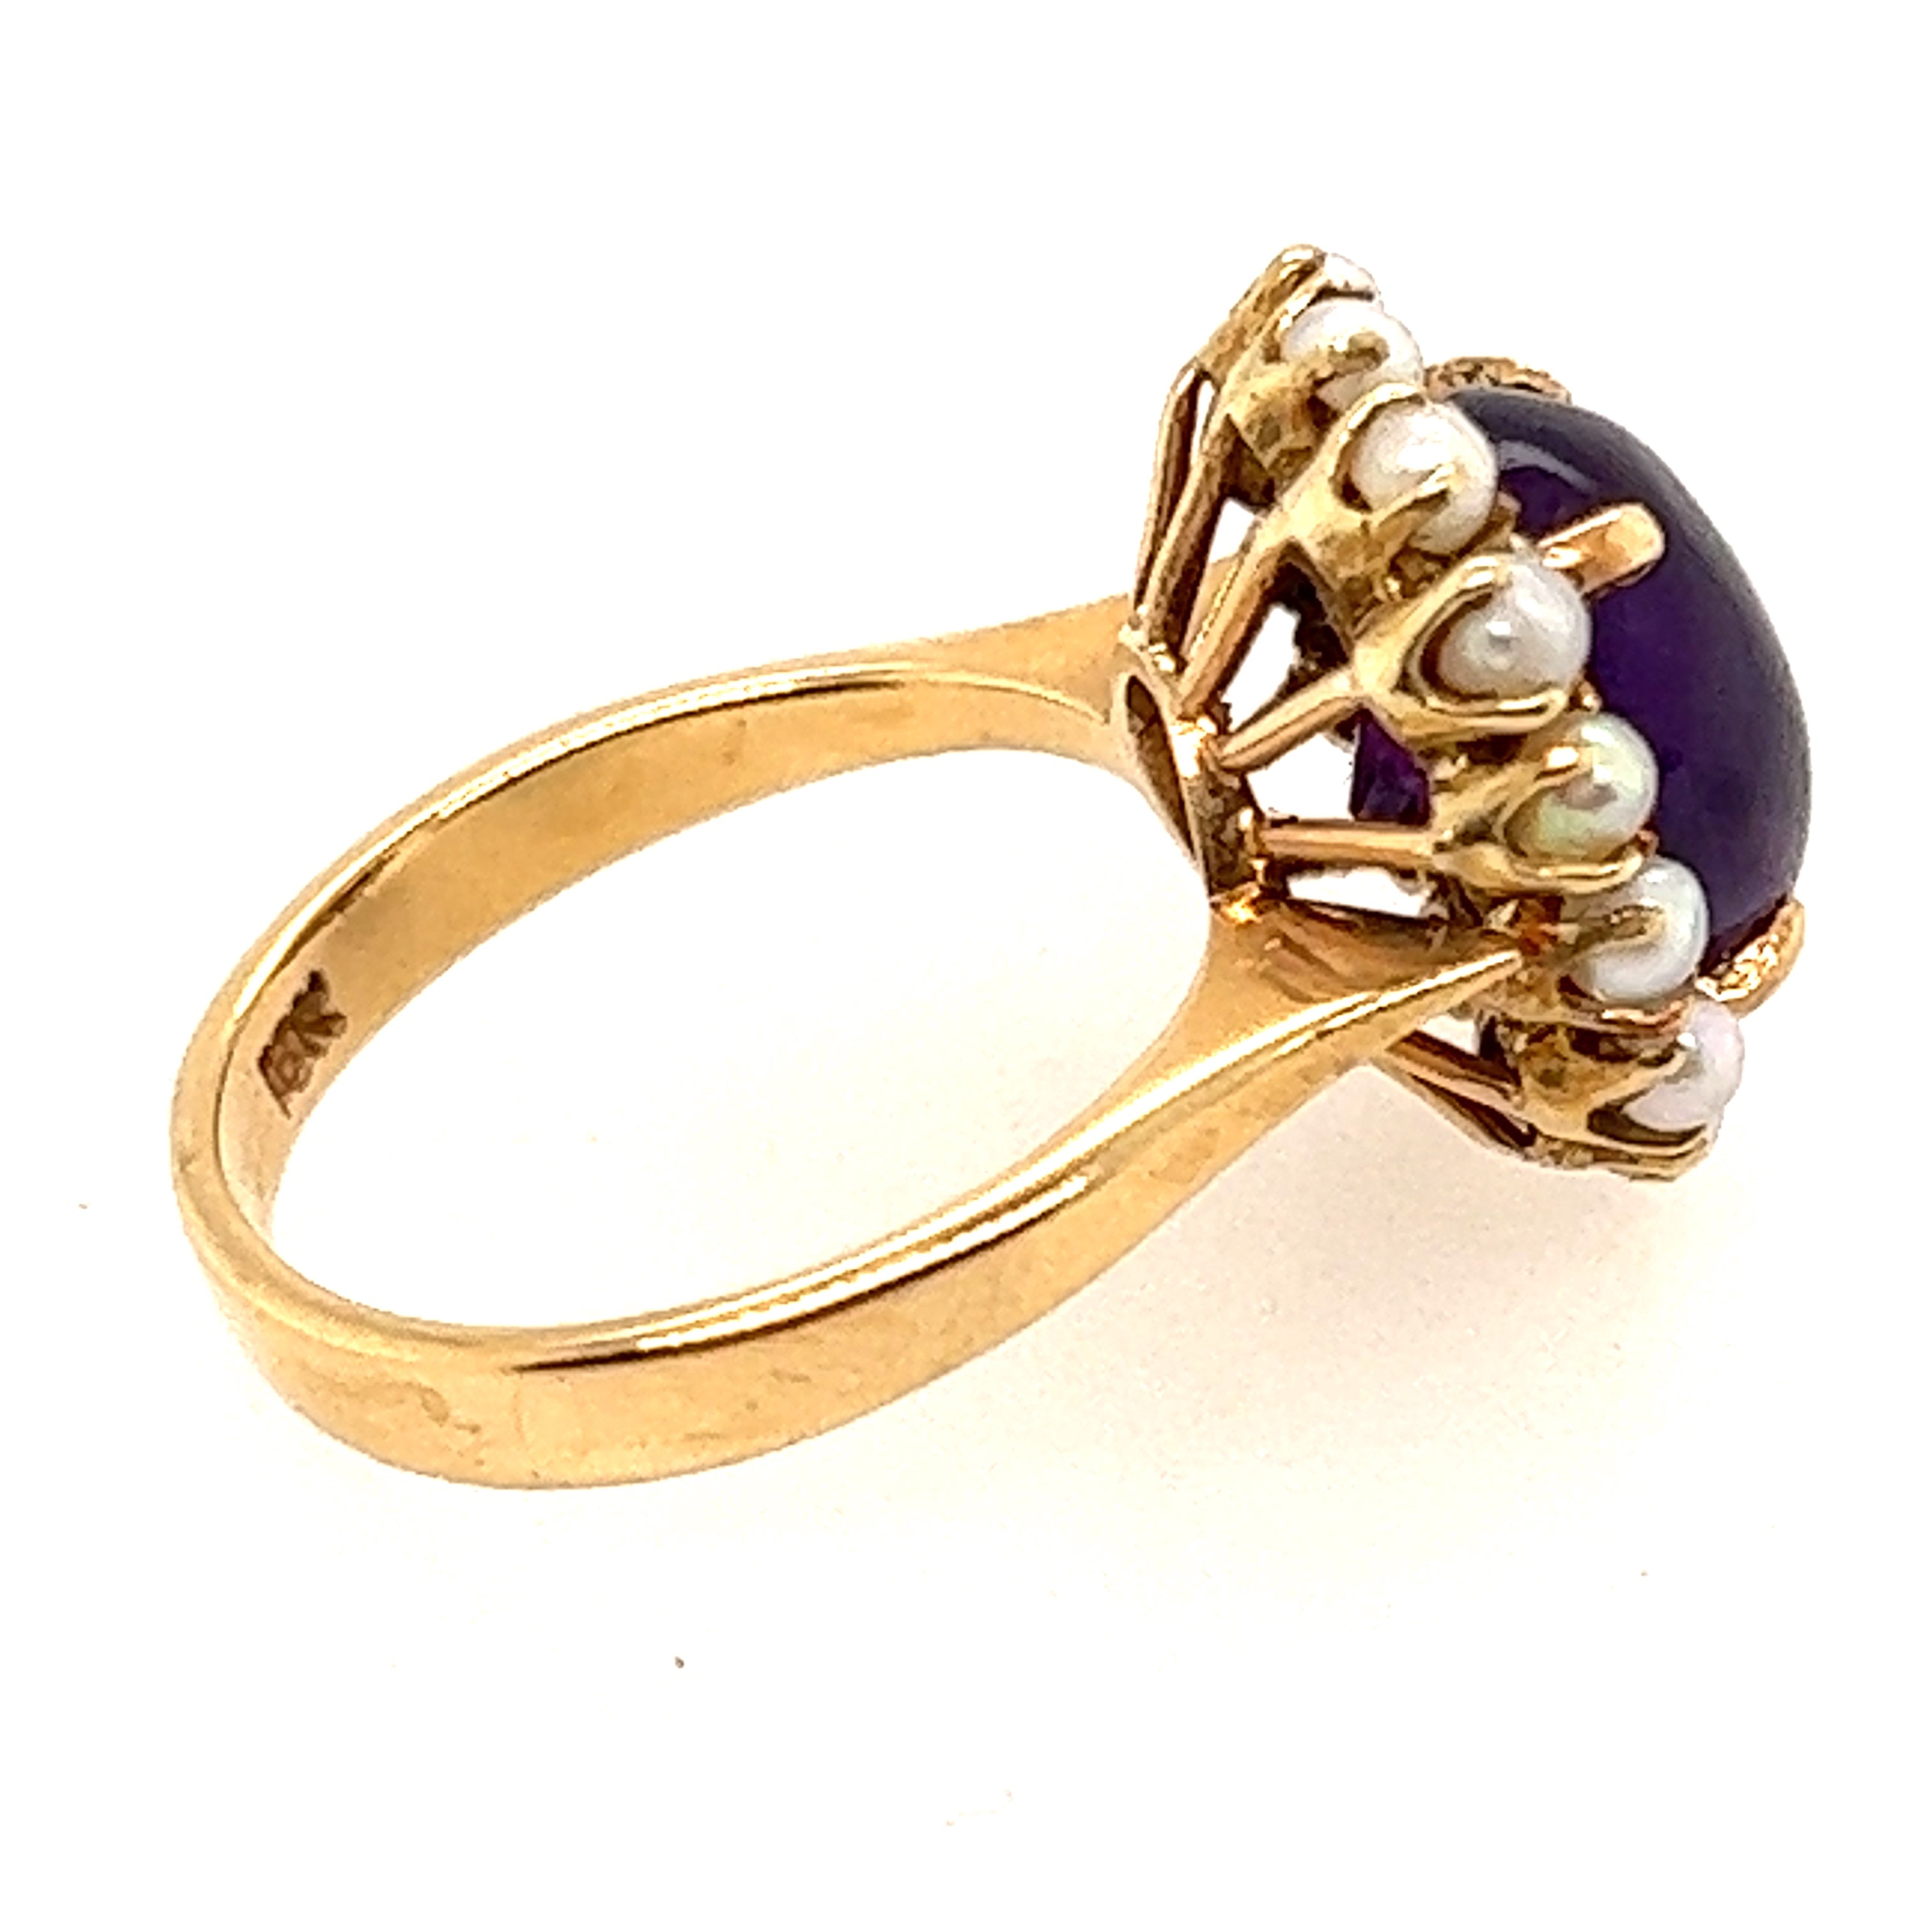 Amethyst & Cultured Pearl Cluster Ring set in 18ct Yellow Gold